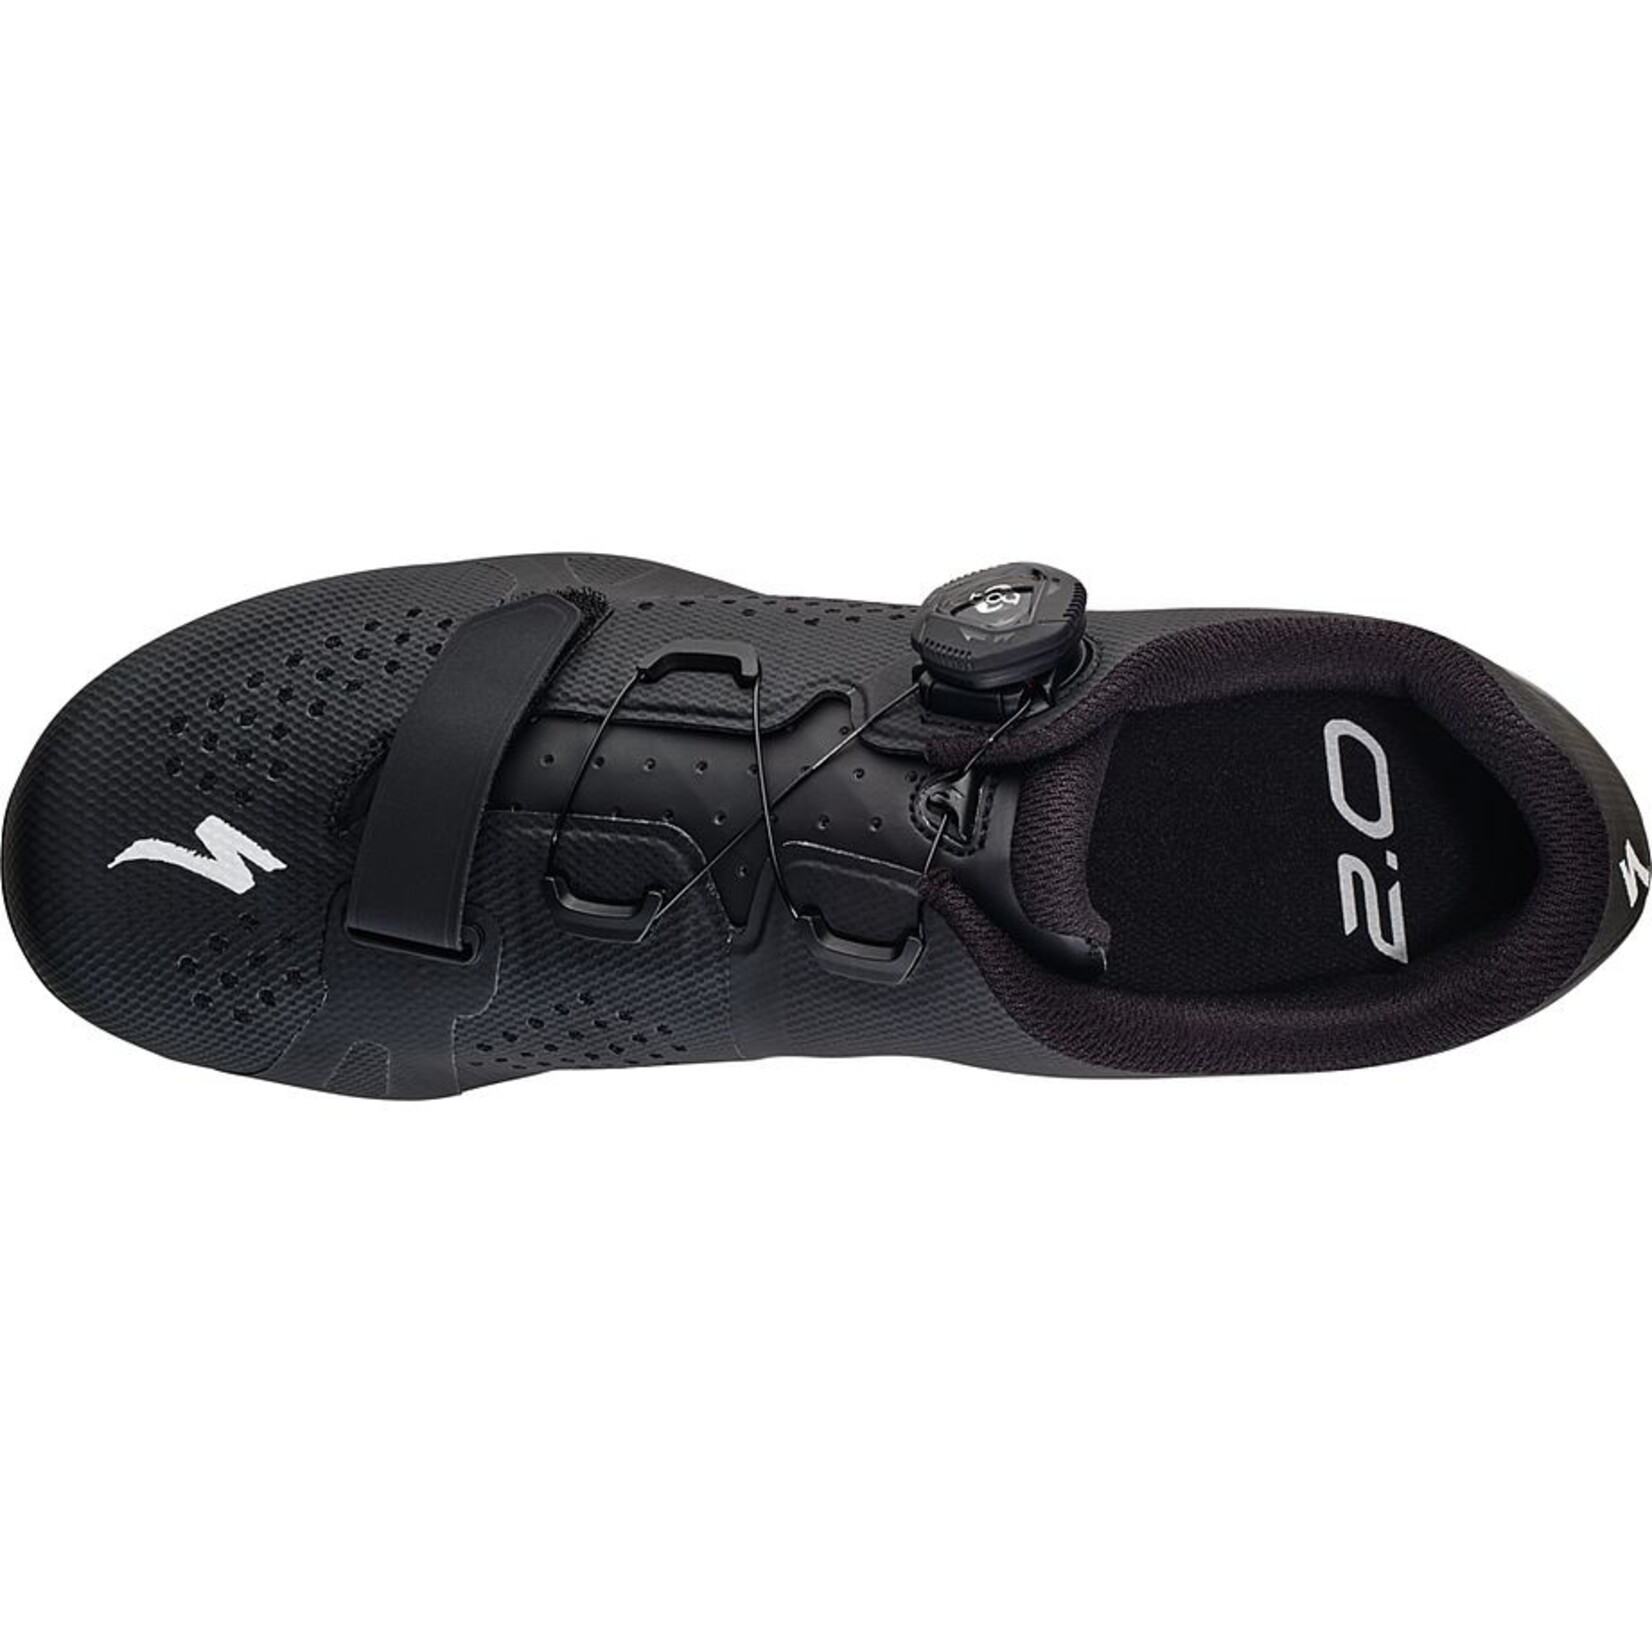 Specialized Torch 2.0 Road Shoes in Black Wide